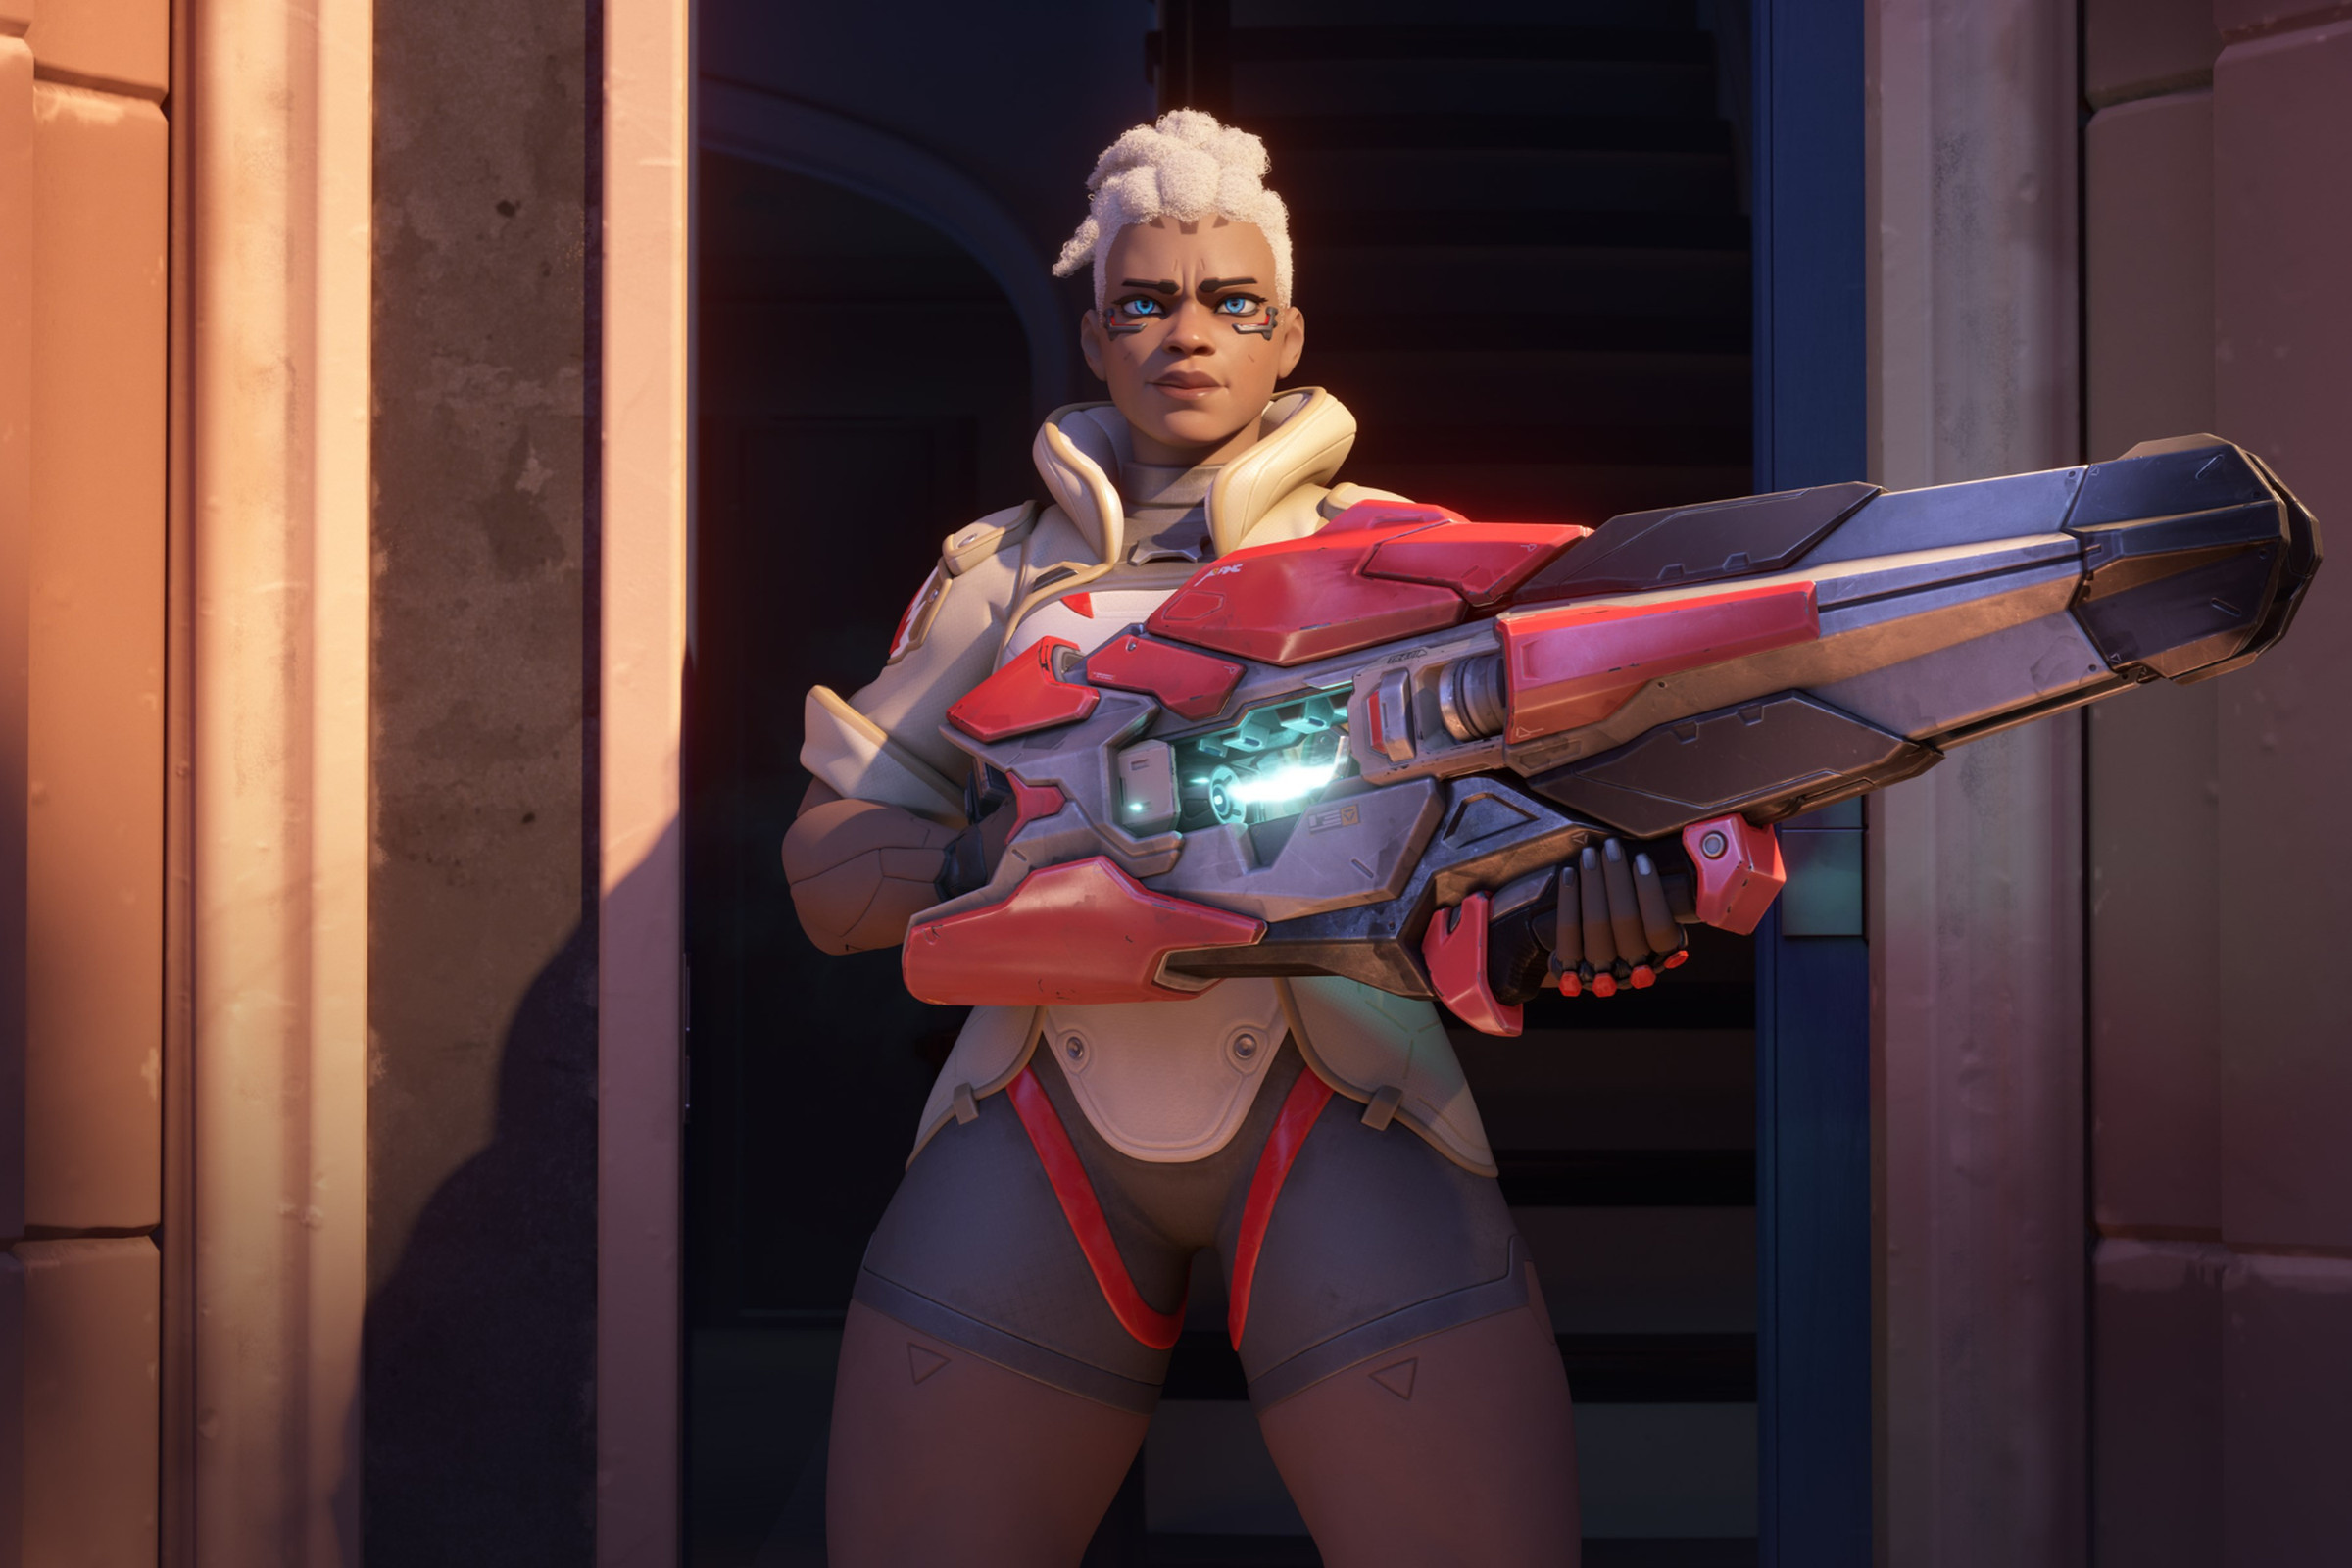 Screenshot from the Overwatch 2 cinematic Calling featuring the hero Sojourn standing with her signature railgun as she embarks to save her city